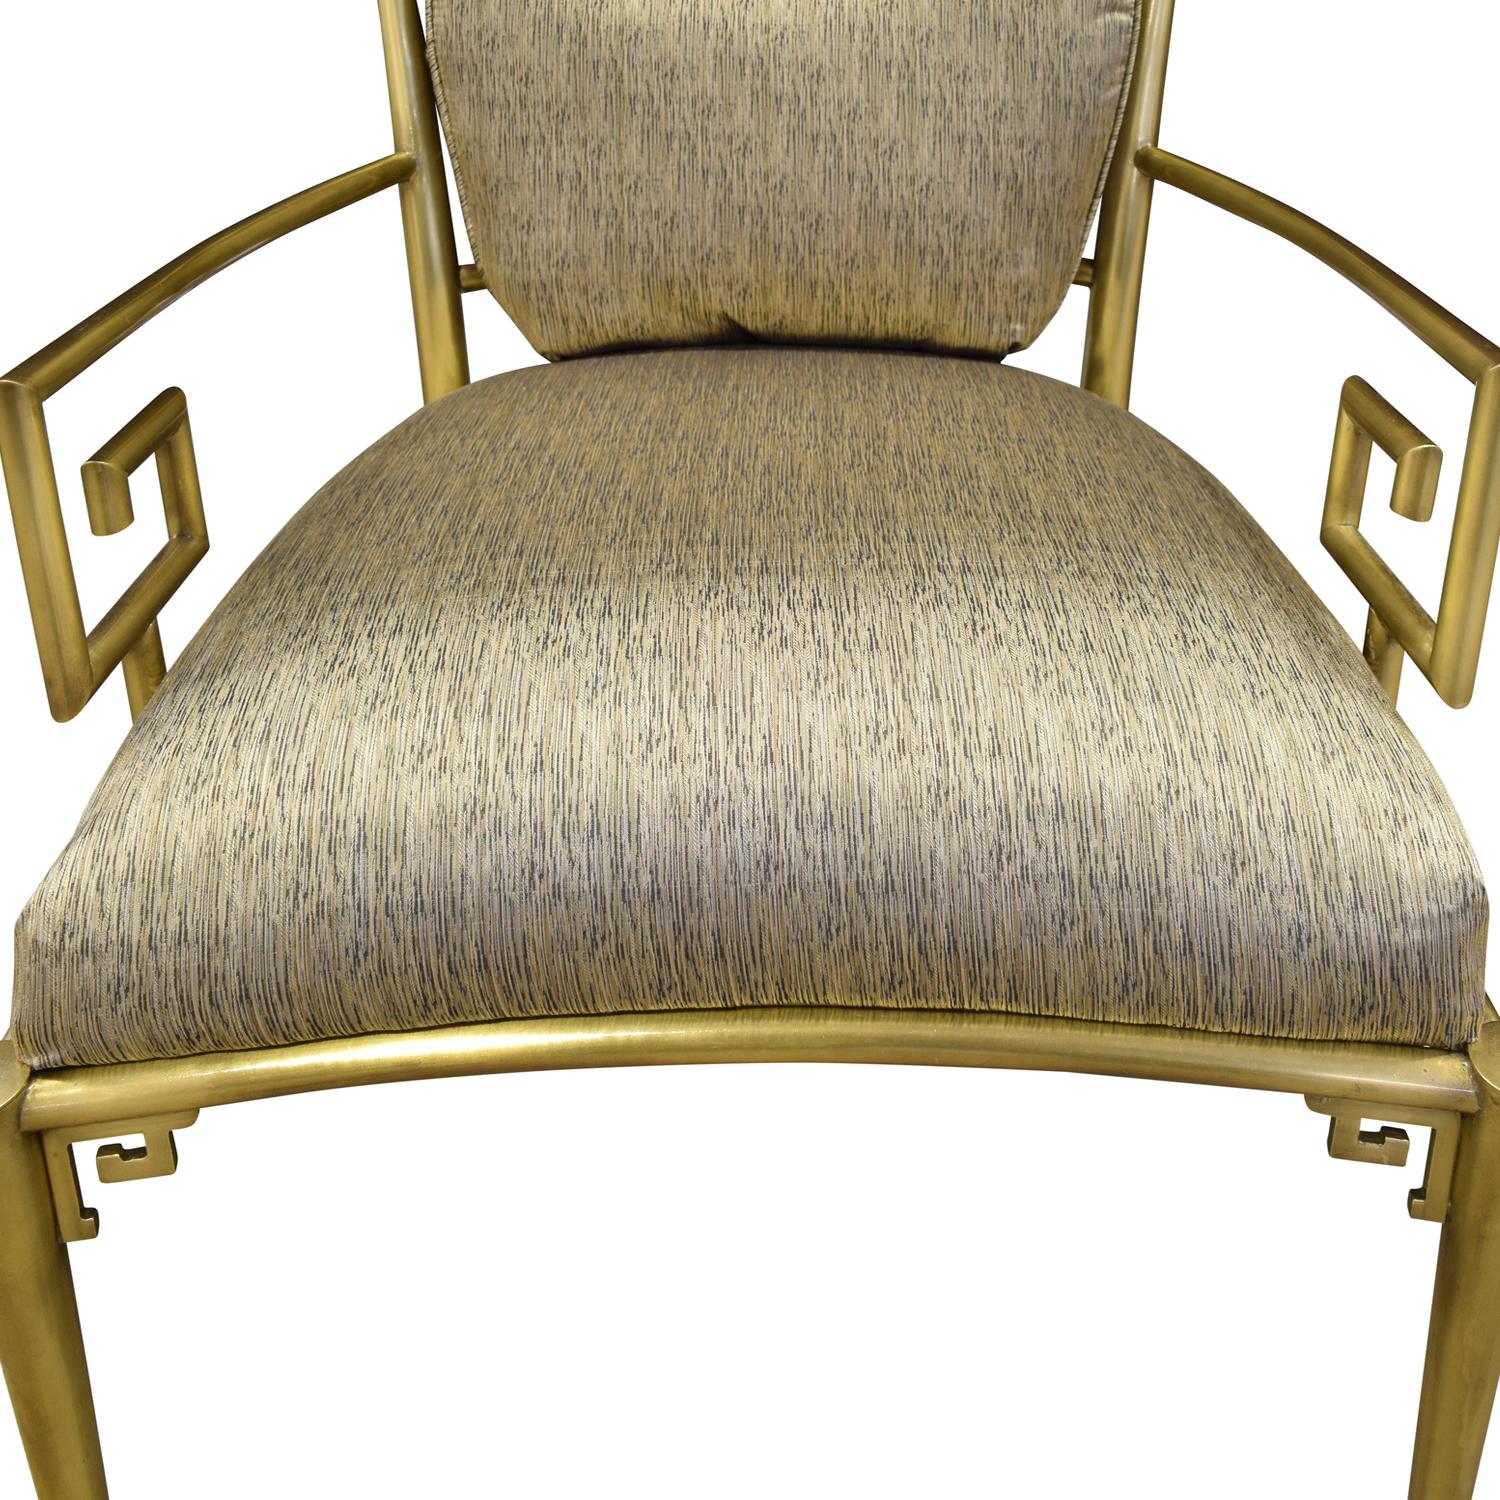 American Mastercraft Pair of Greek Key Lounge Chairs in Brass, 1960s